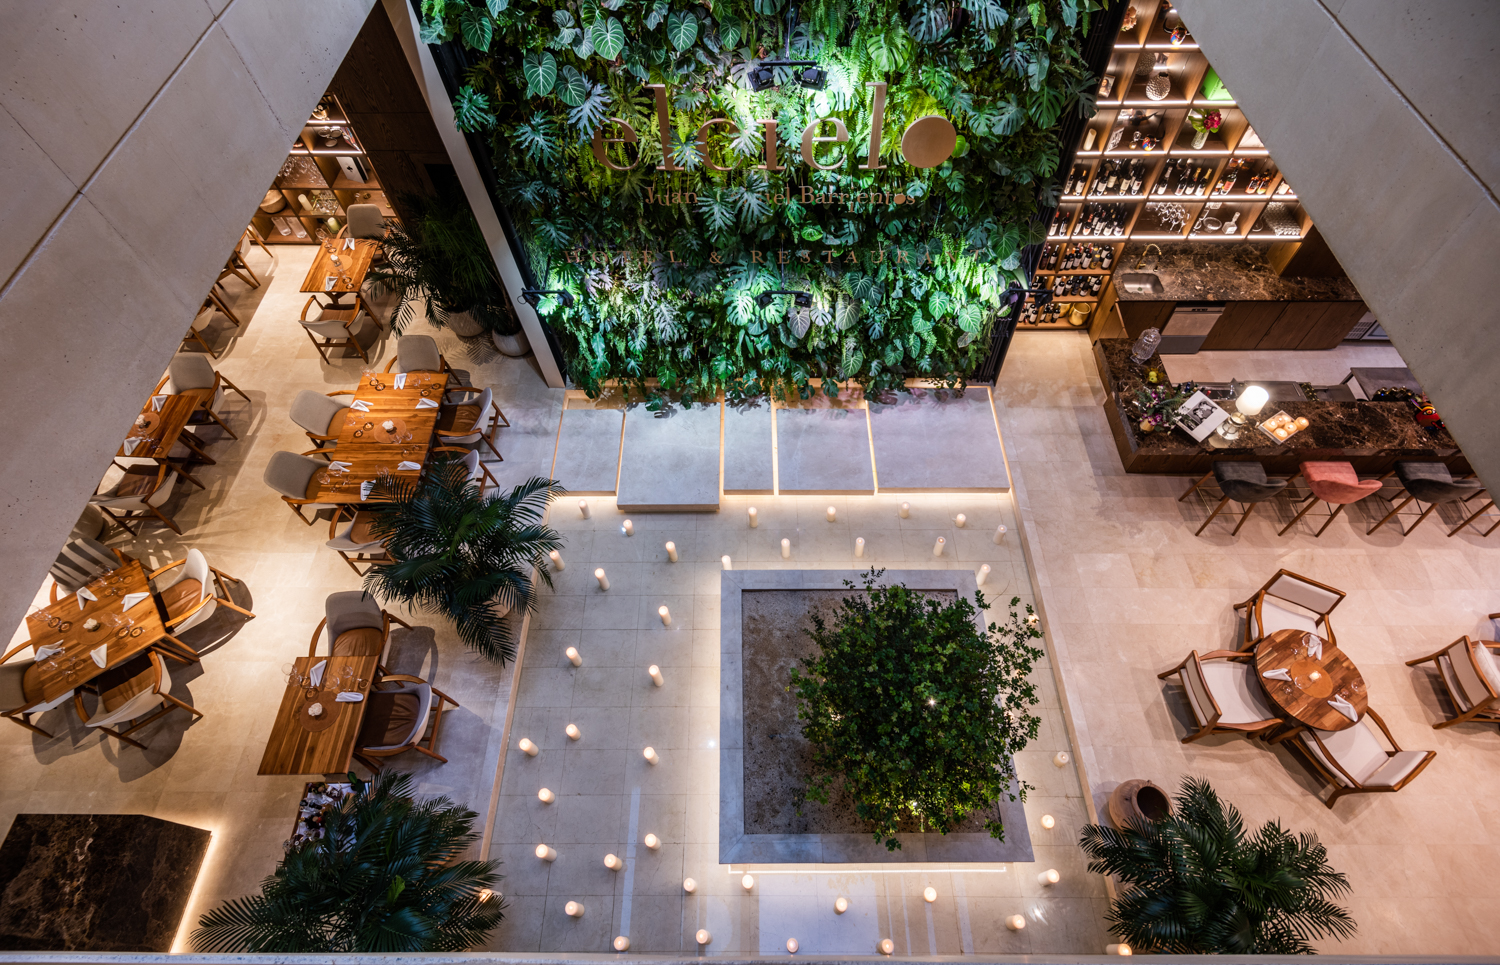 Hotel lobby from above with green wall and candles